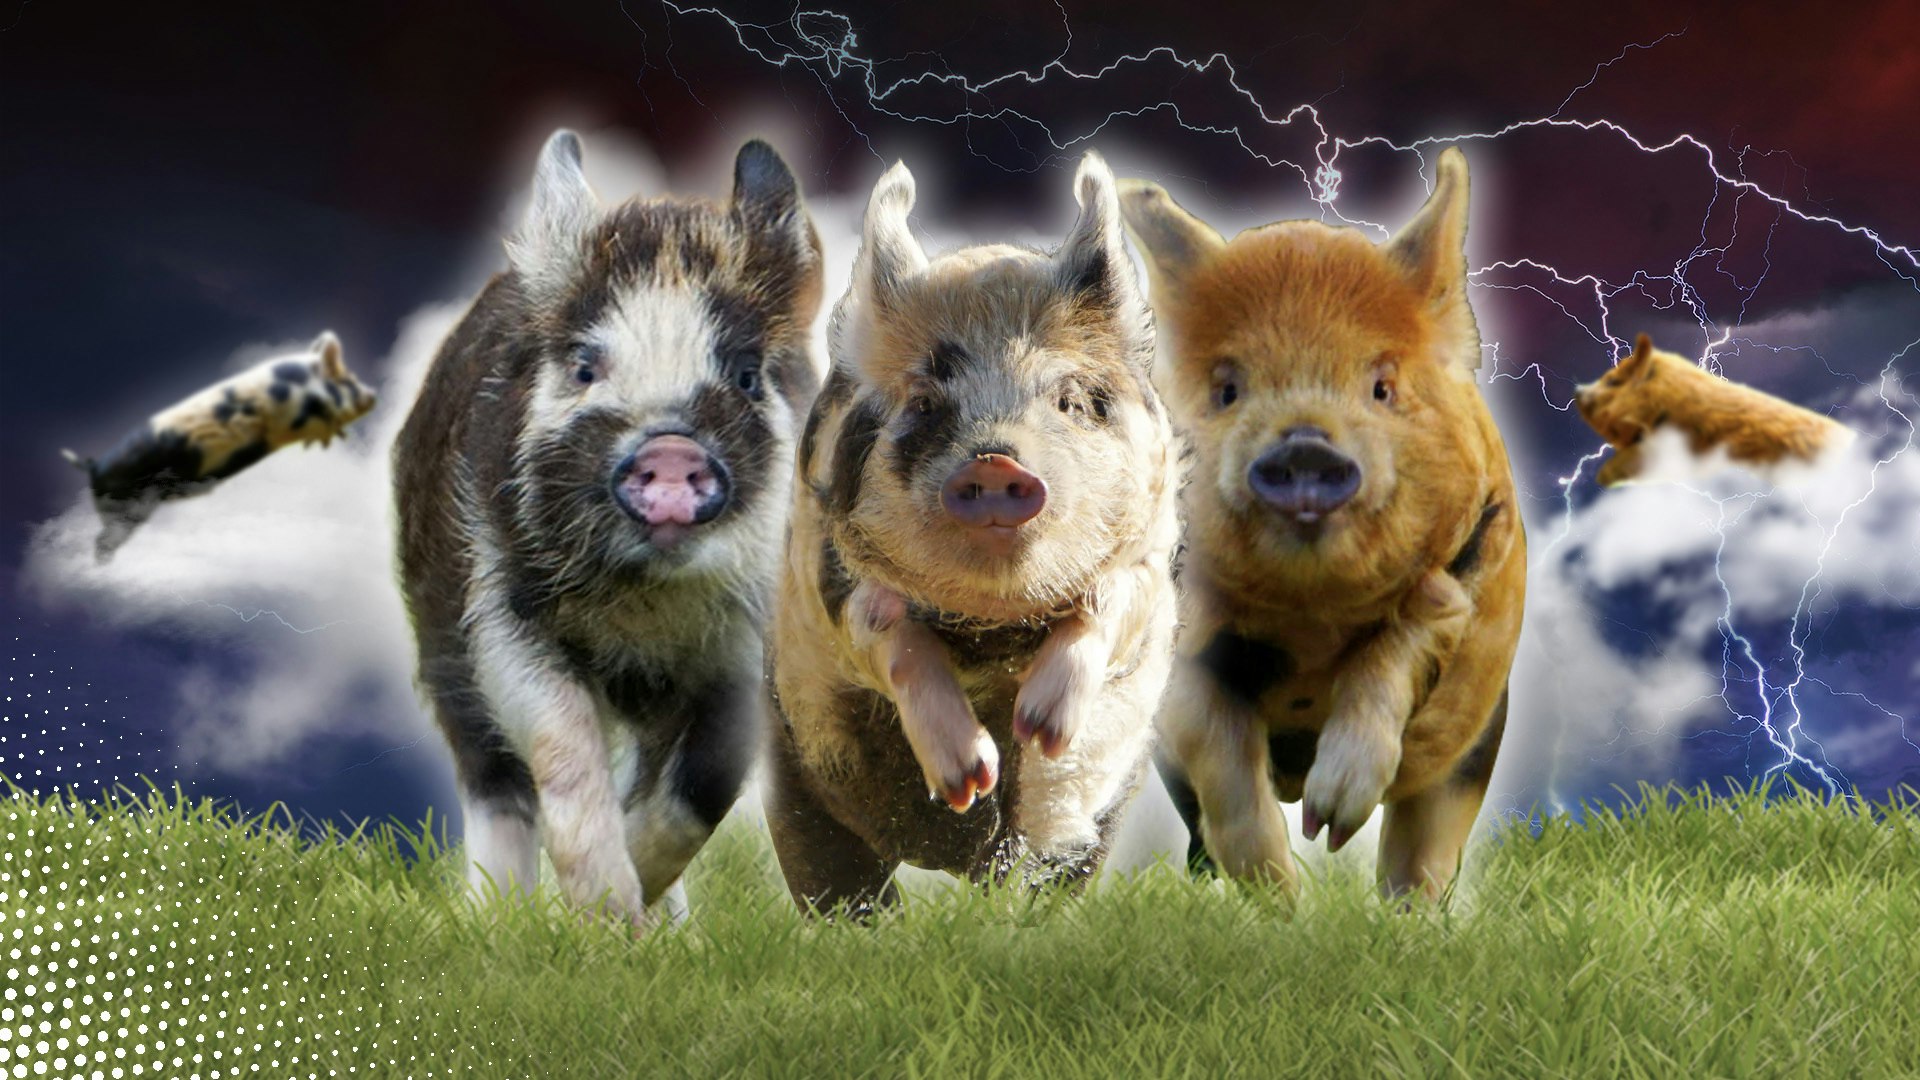 Inside the wild world of online pig racing